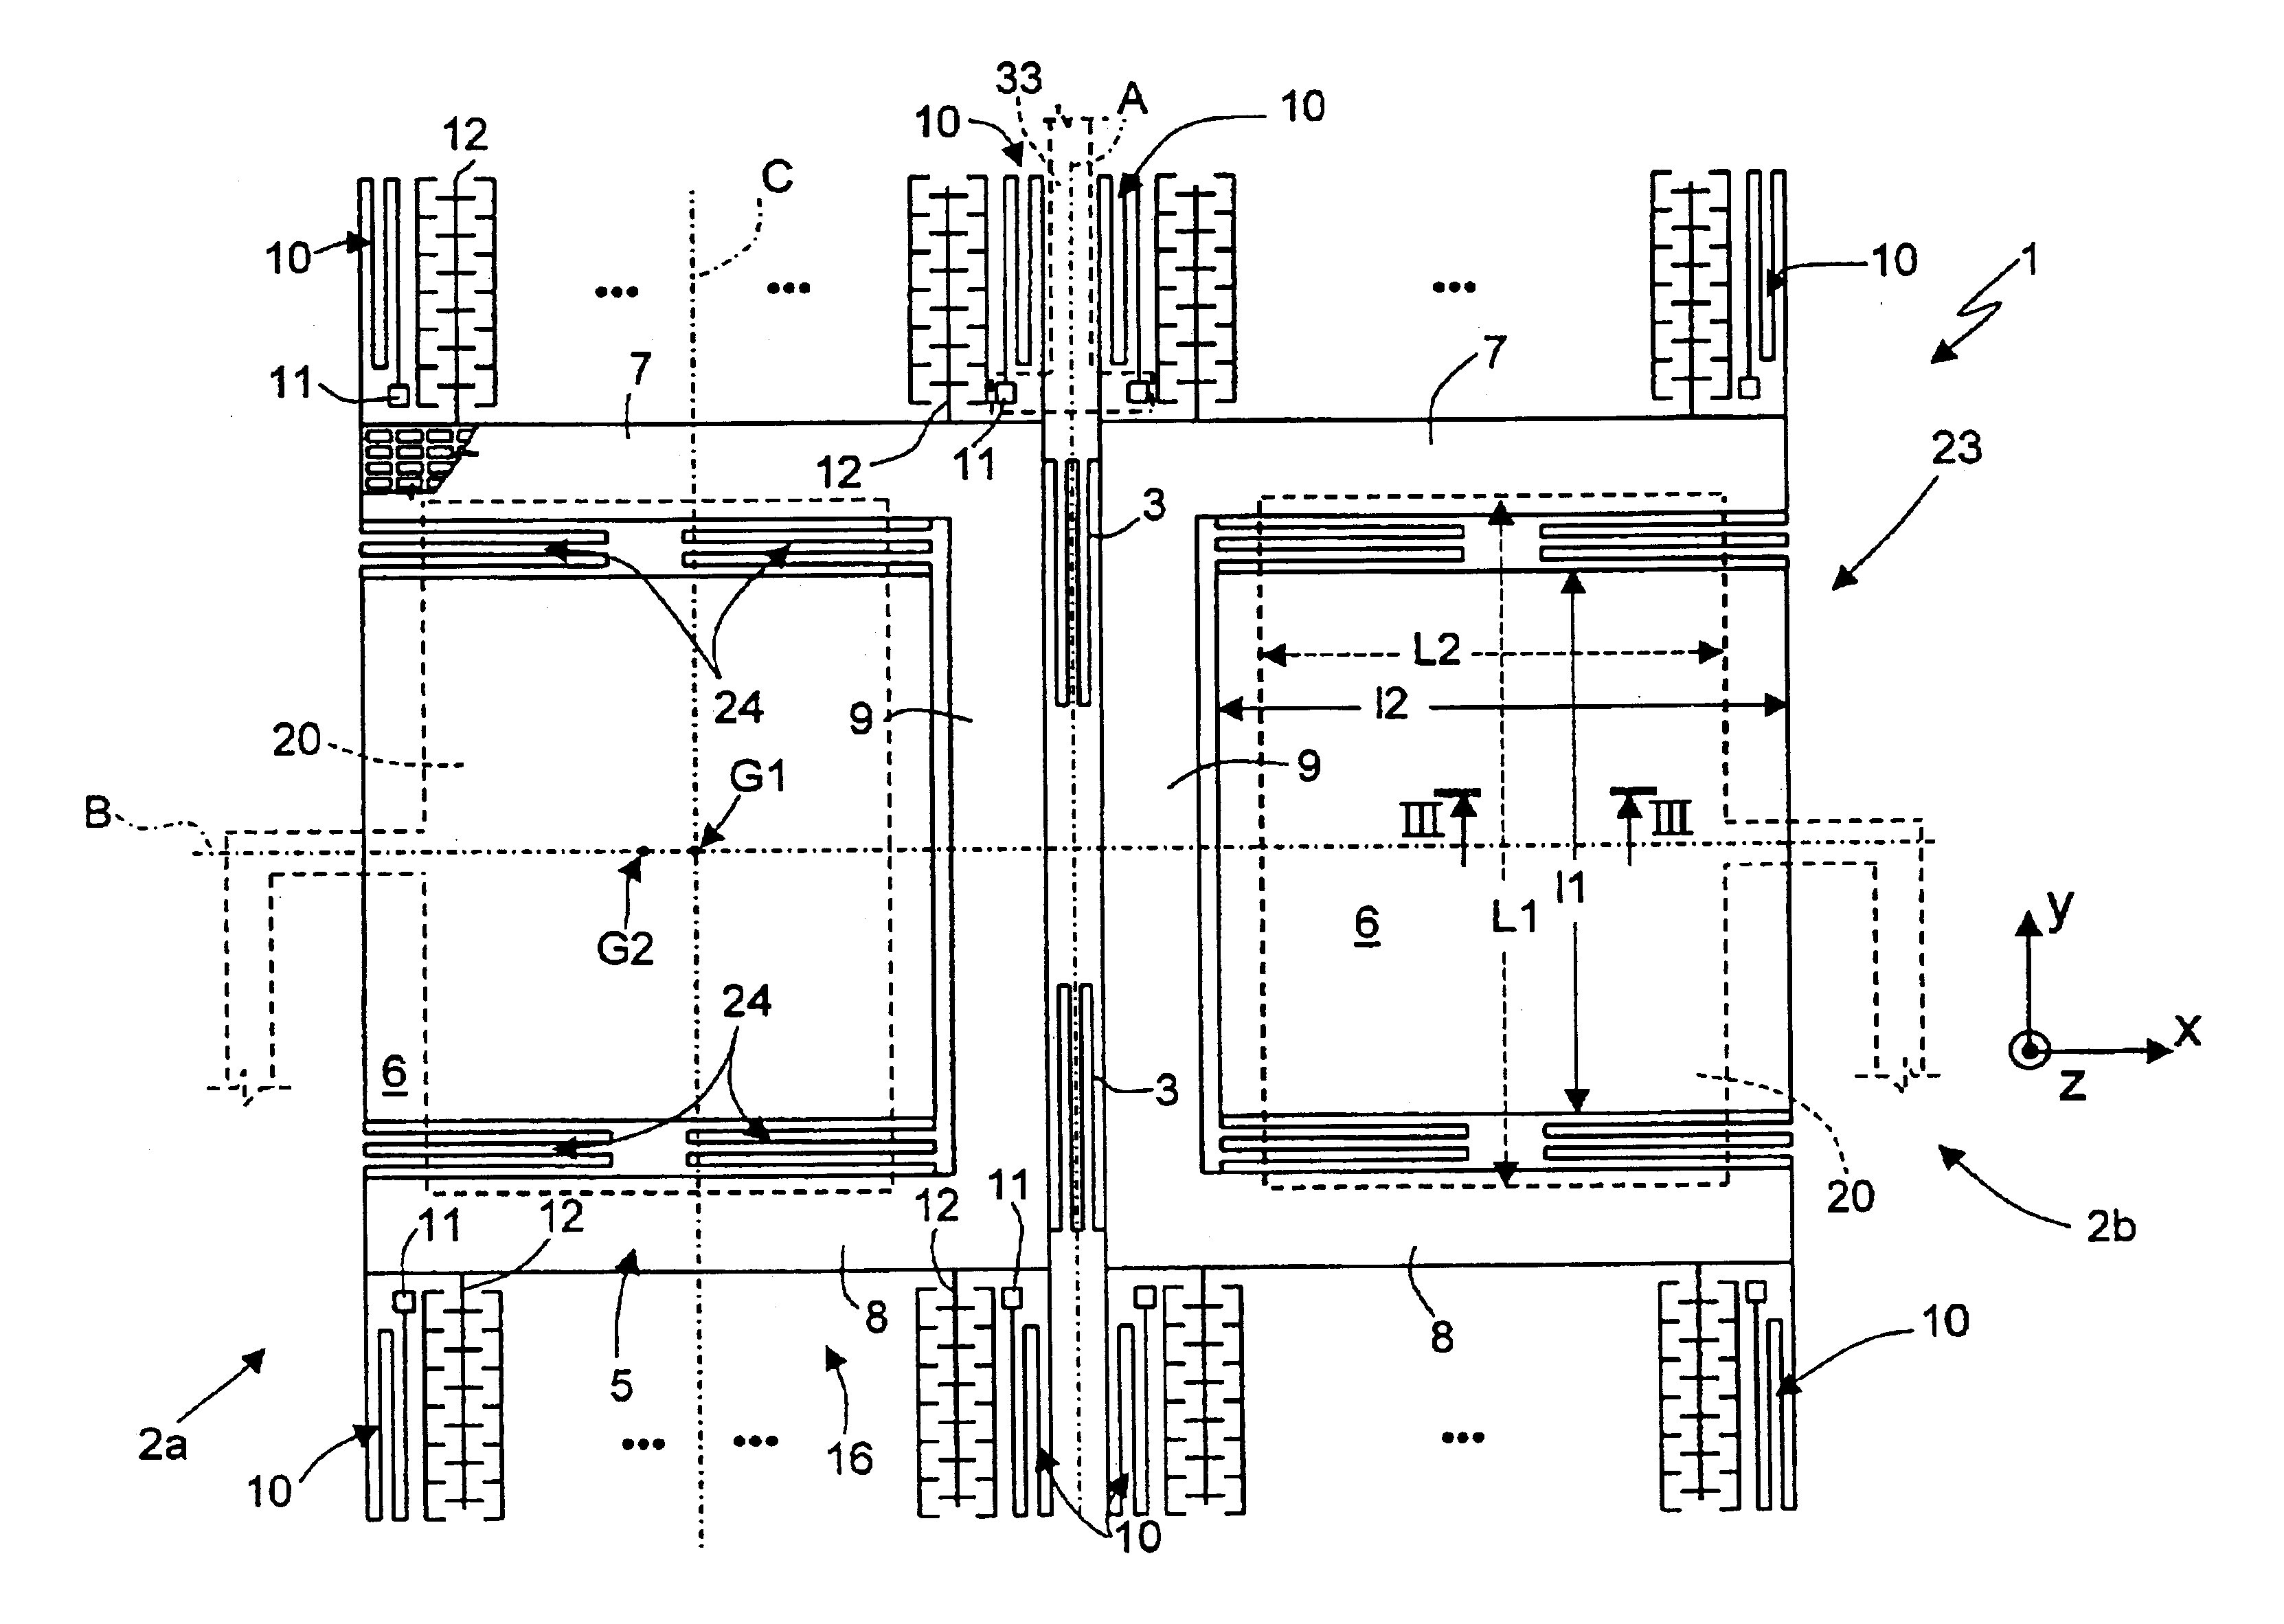 Integrated gyroscope of semiconductor material with at least one sensitive axis in the sensor plane